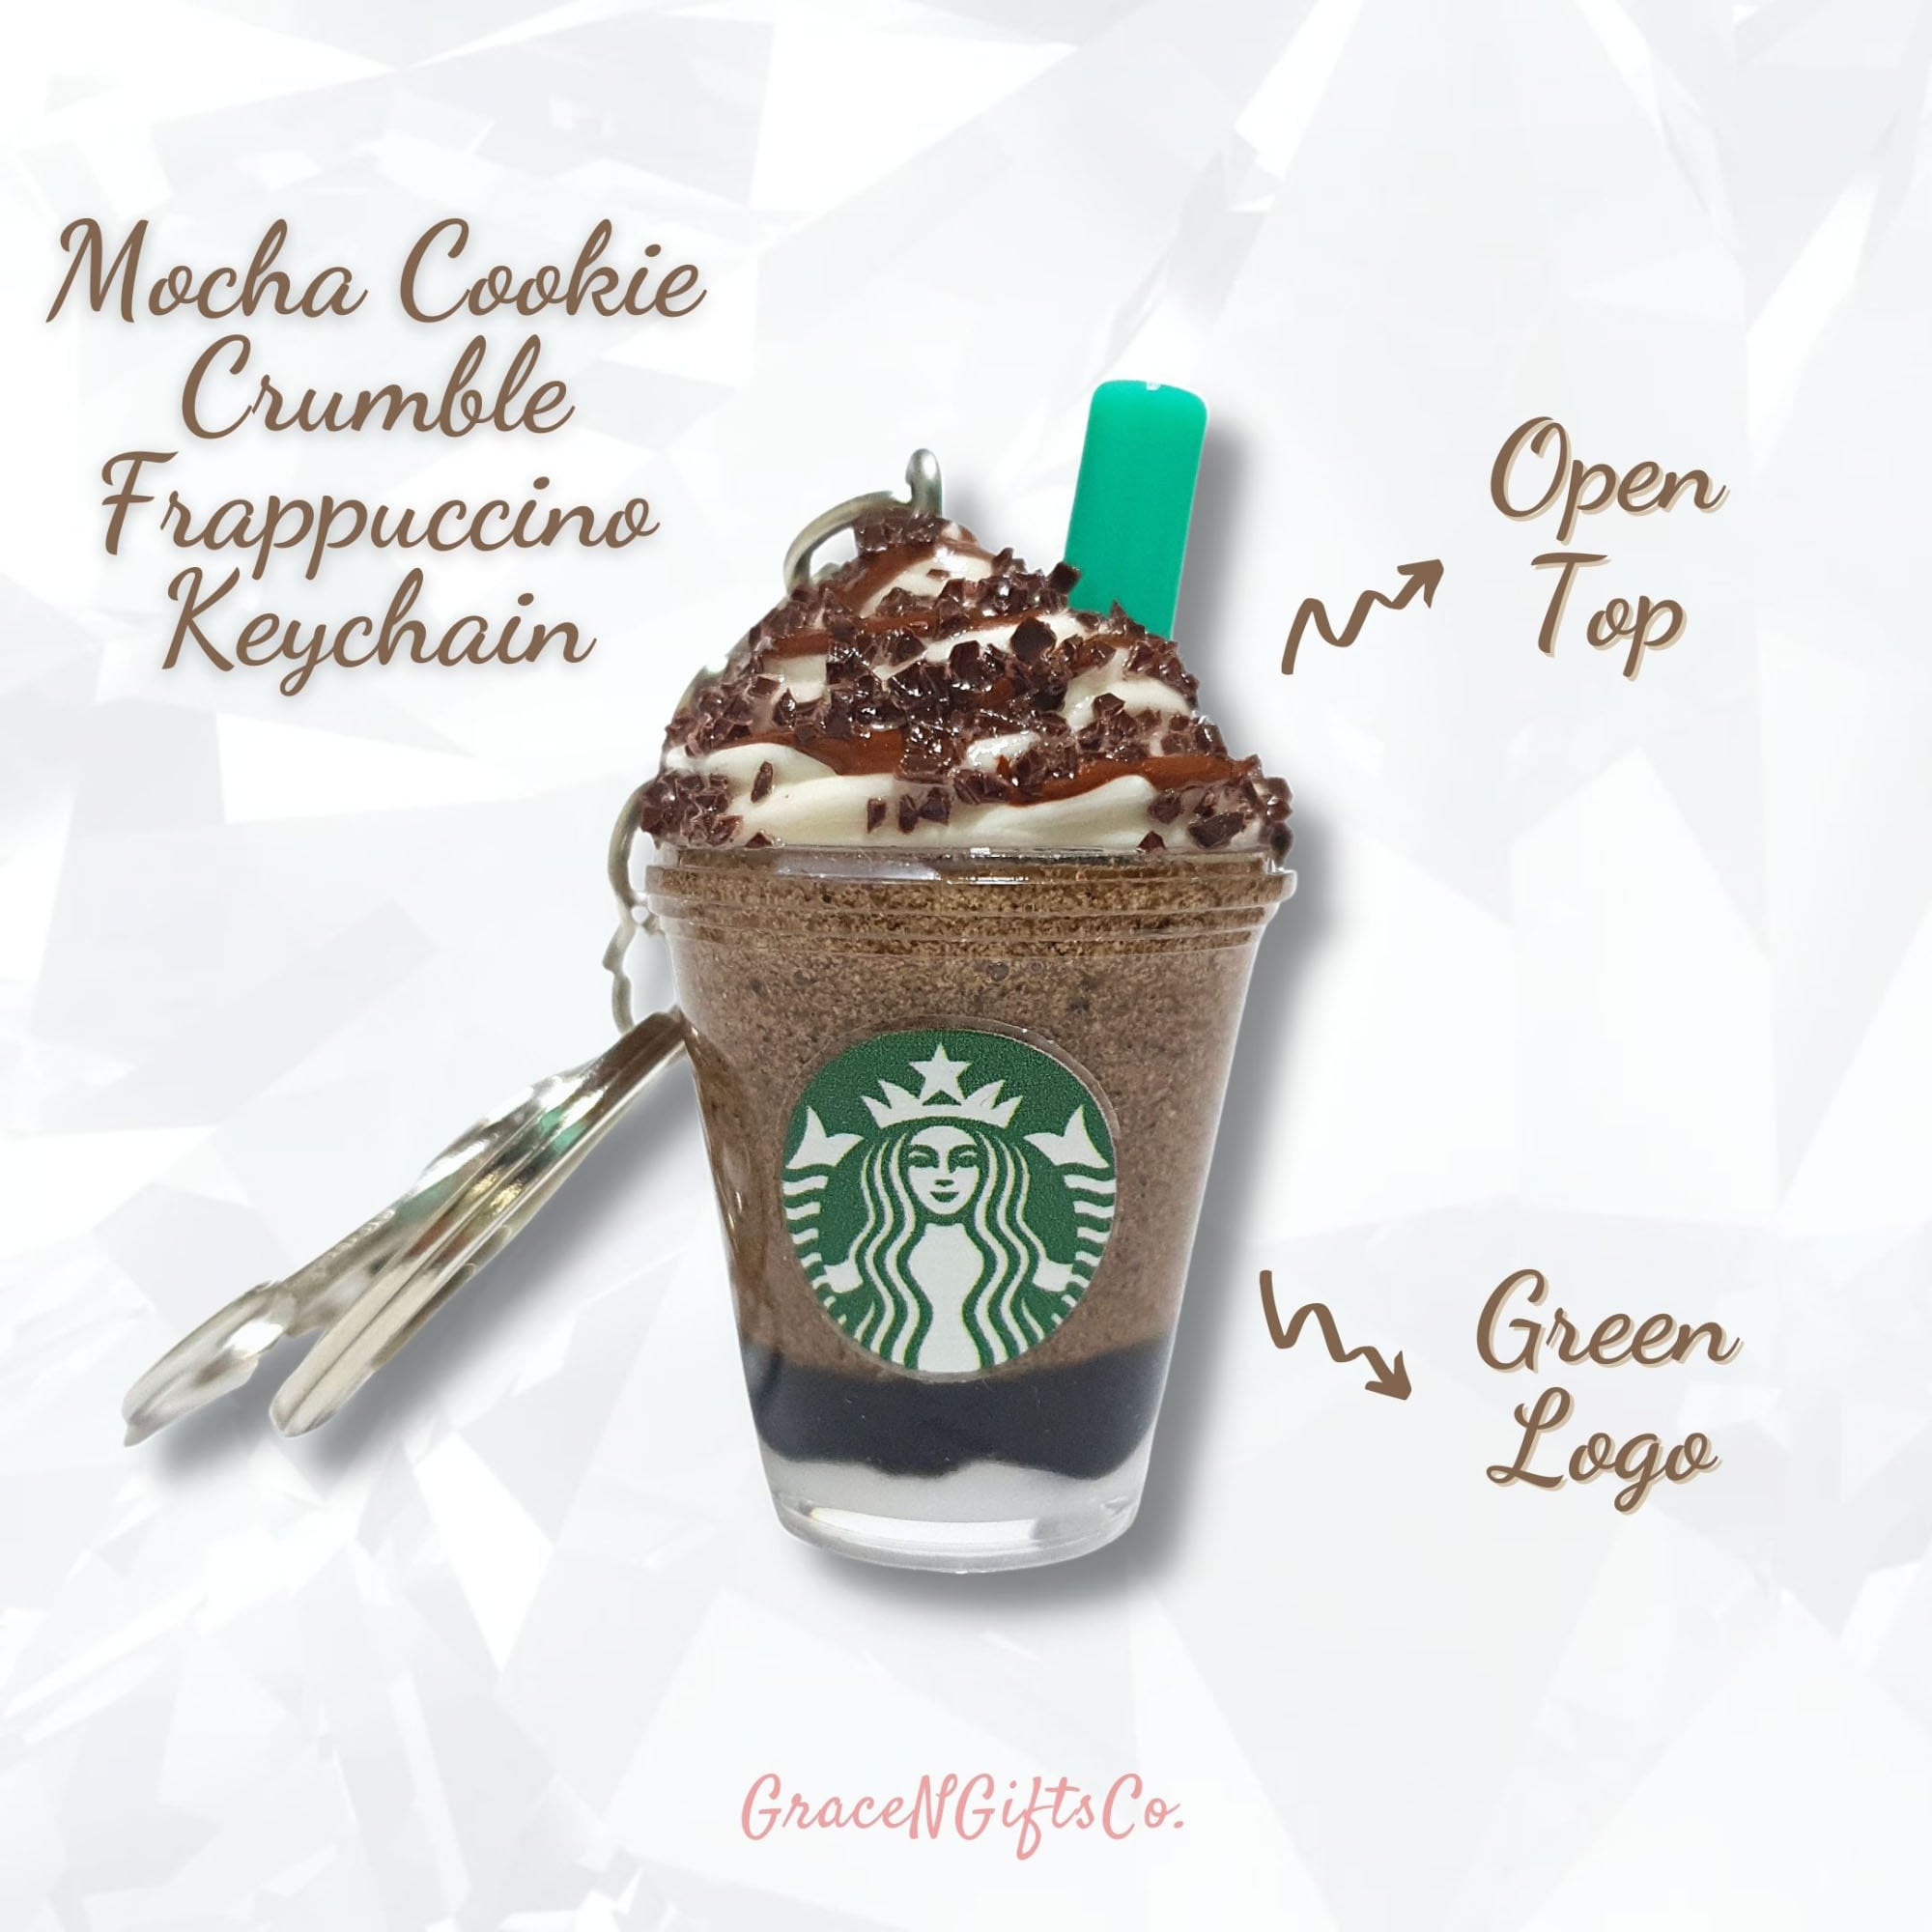 Starbucks Mocha Cookie Crumble Frappuccino Keychain Key Ring Bag Charm  Personalized Gift for Men Women green or White Logo 